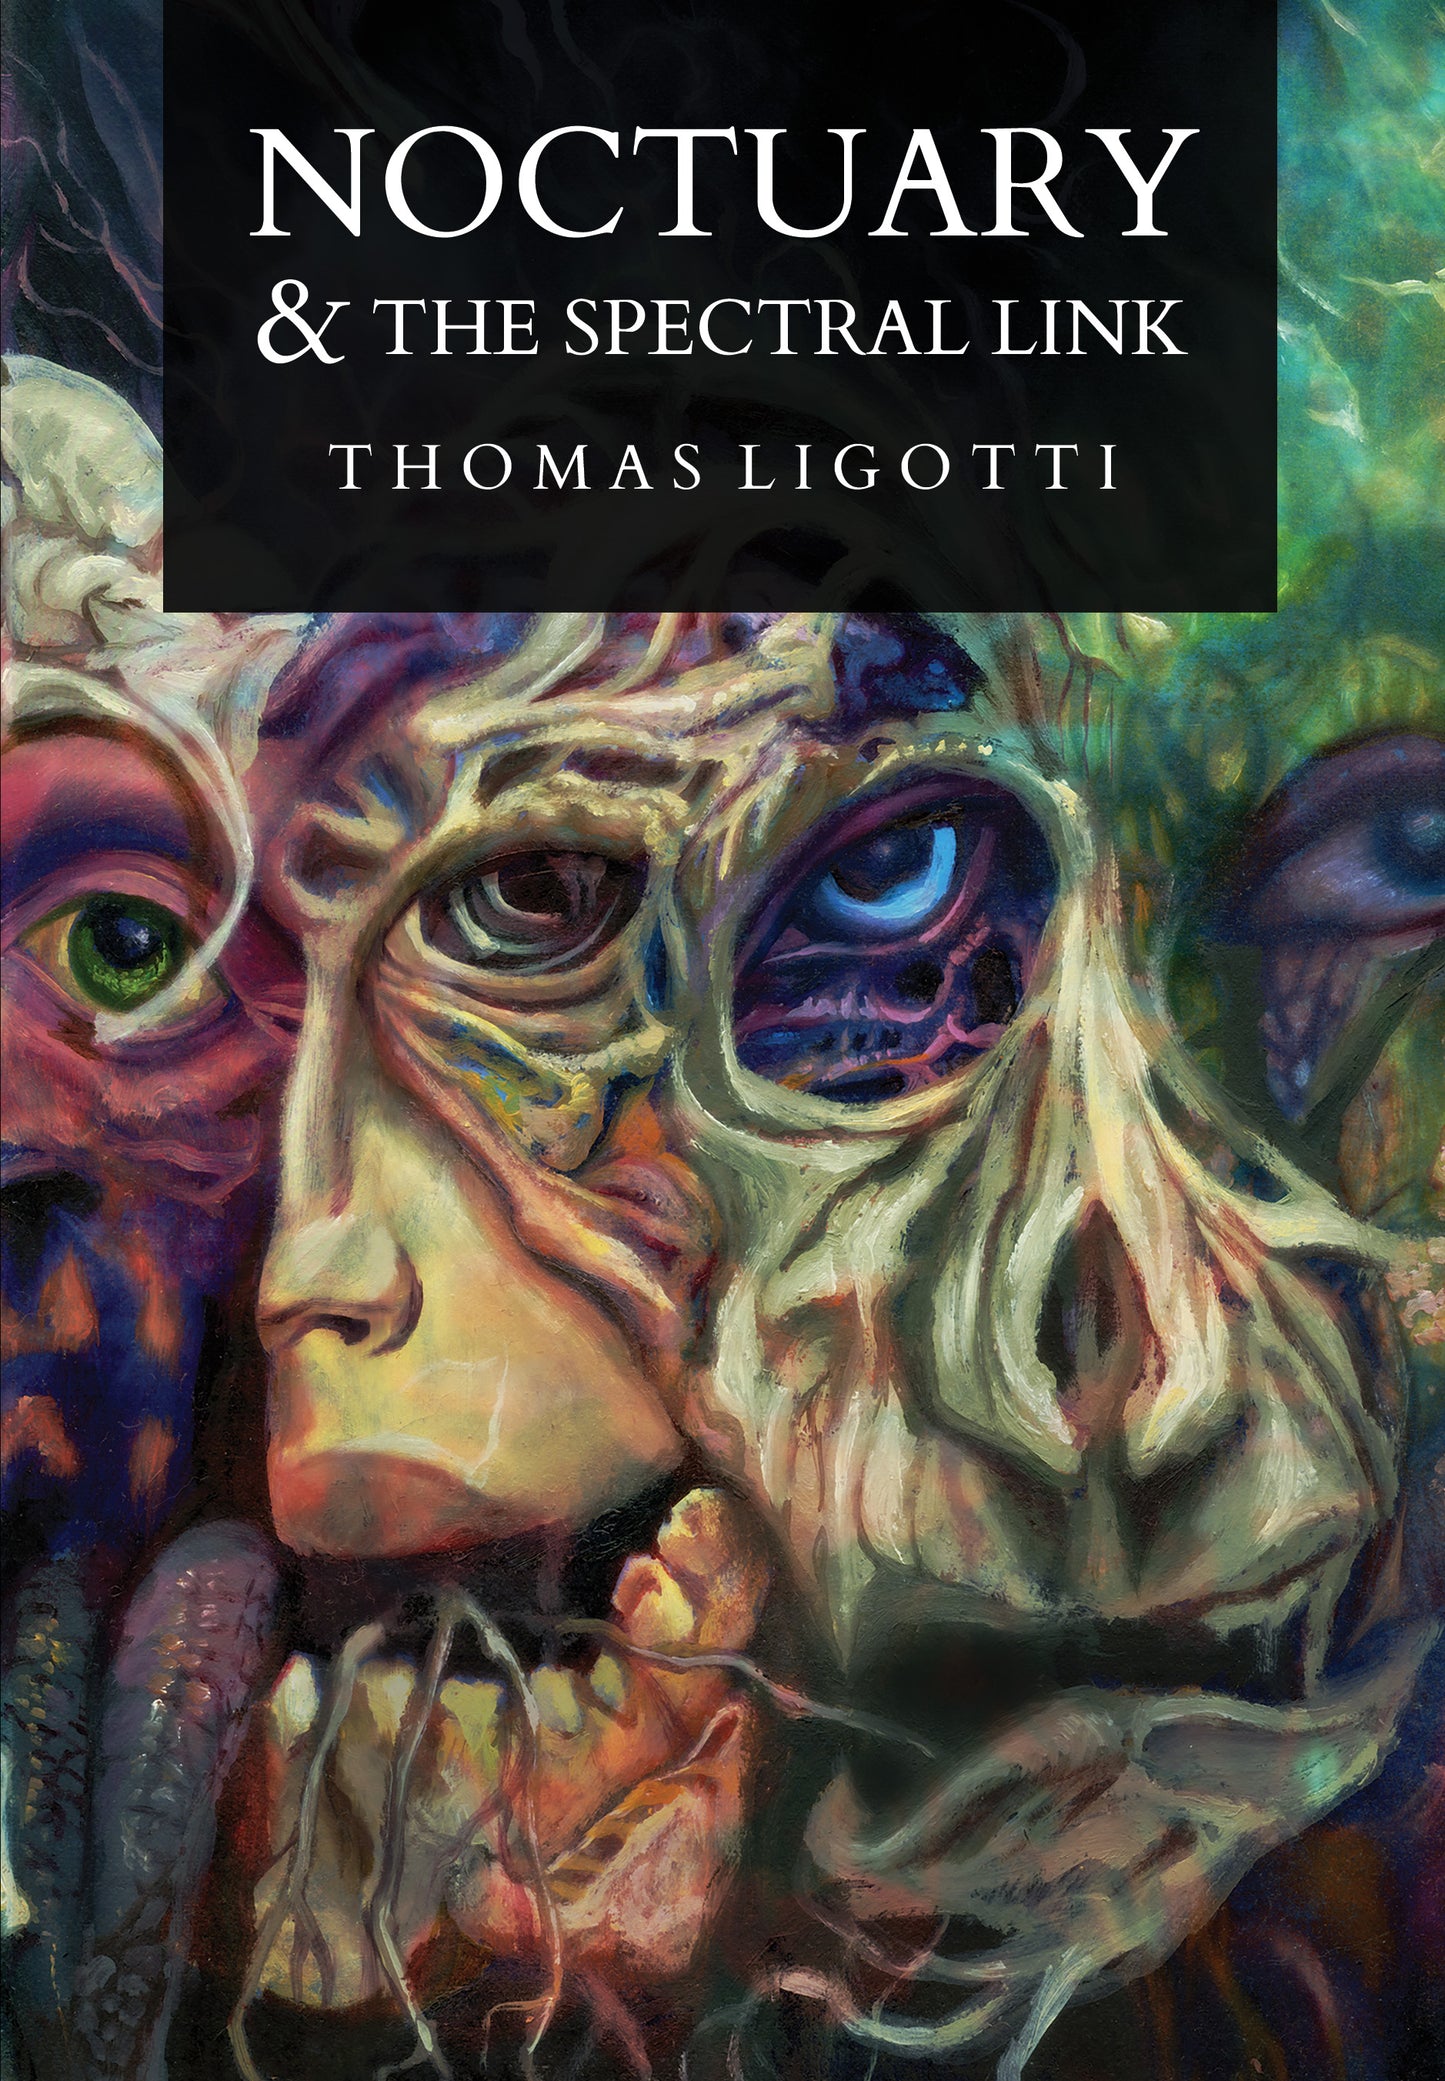 Noctuary and The Spectral Link by Thomas Ligotti